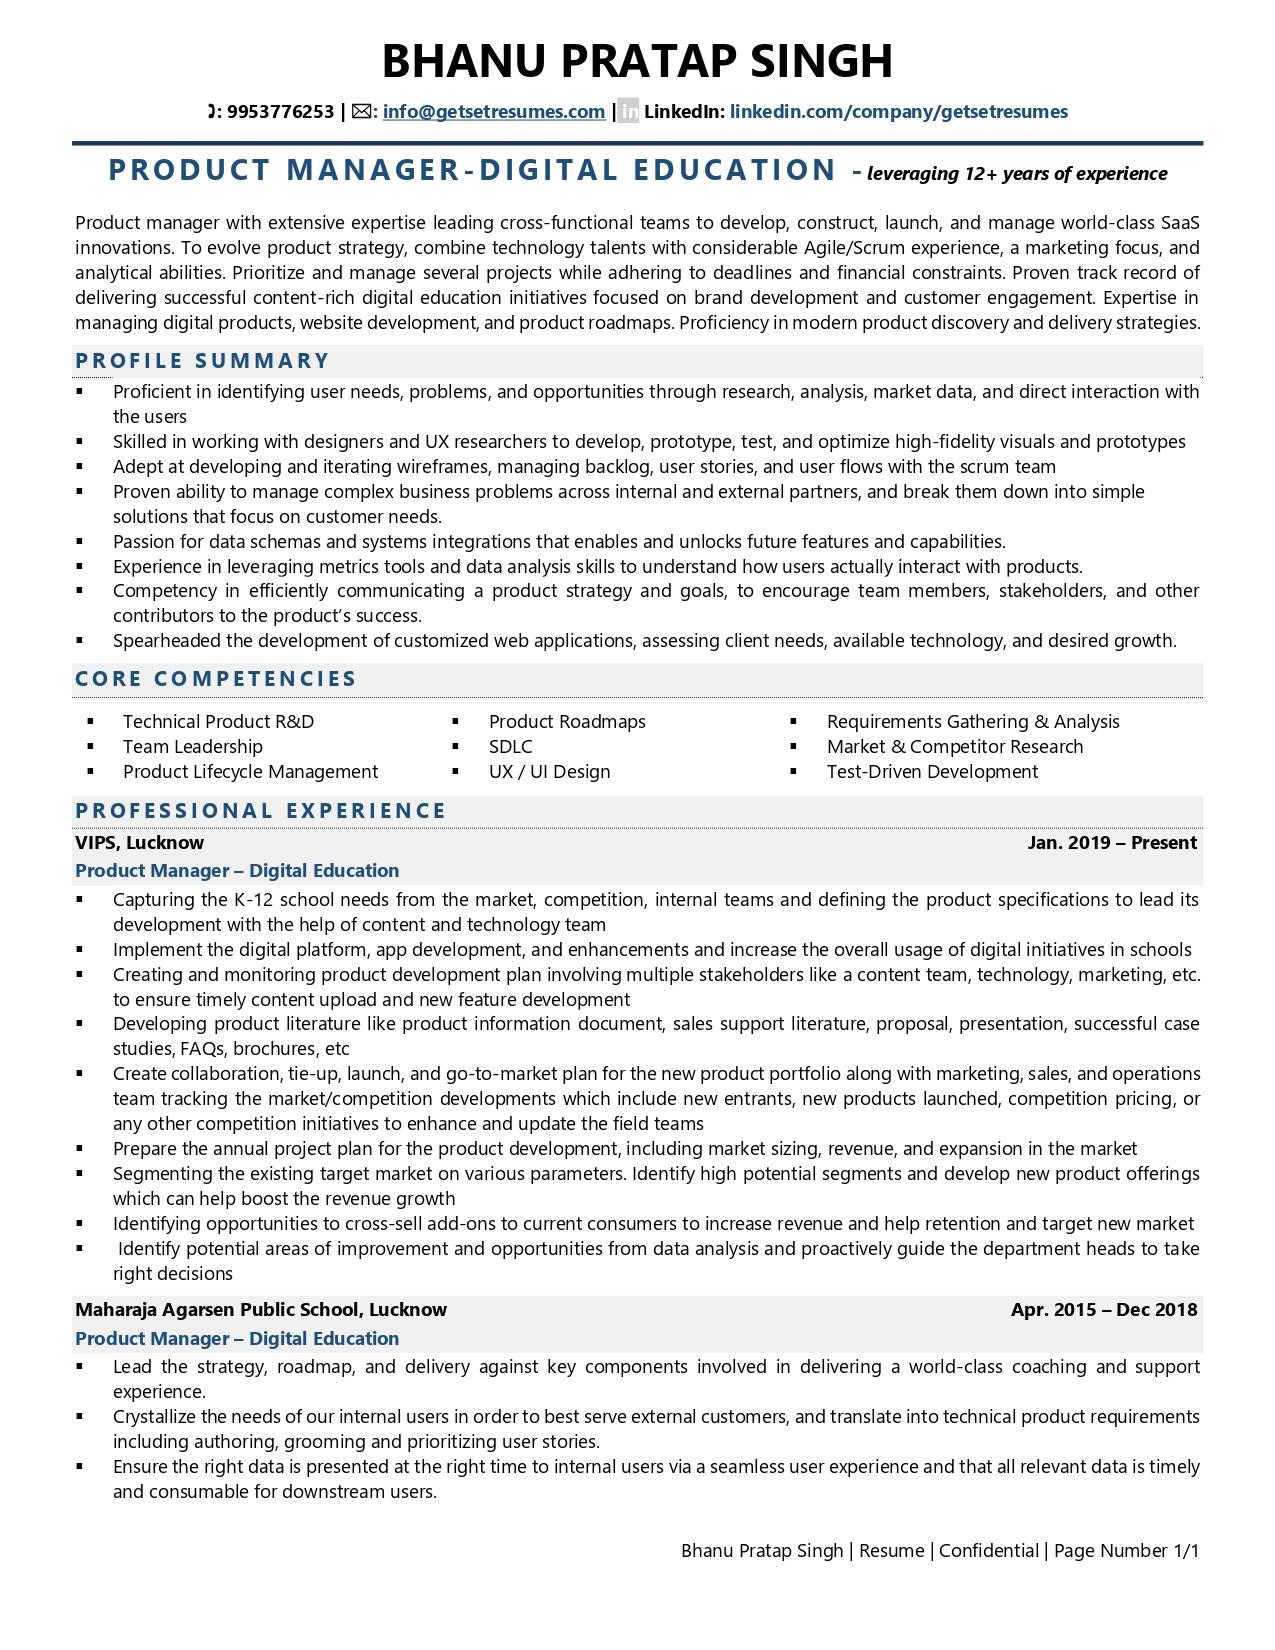 Product Manager - Digital Education - Resume Example & Template